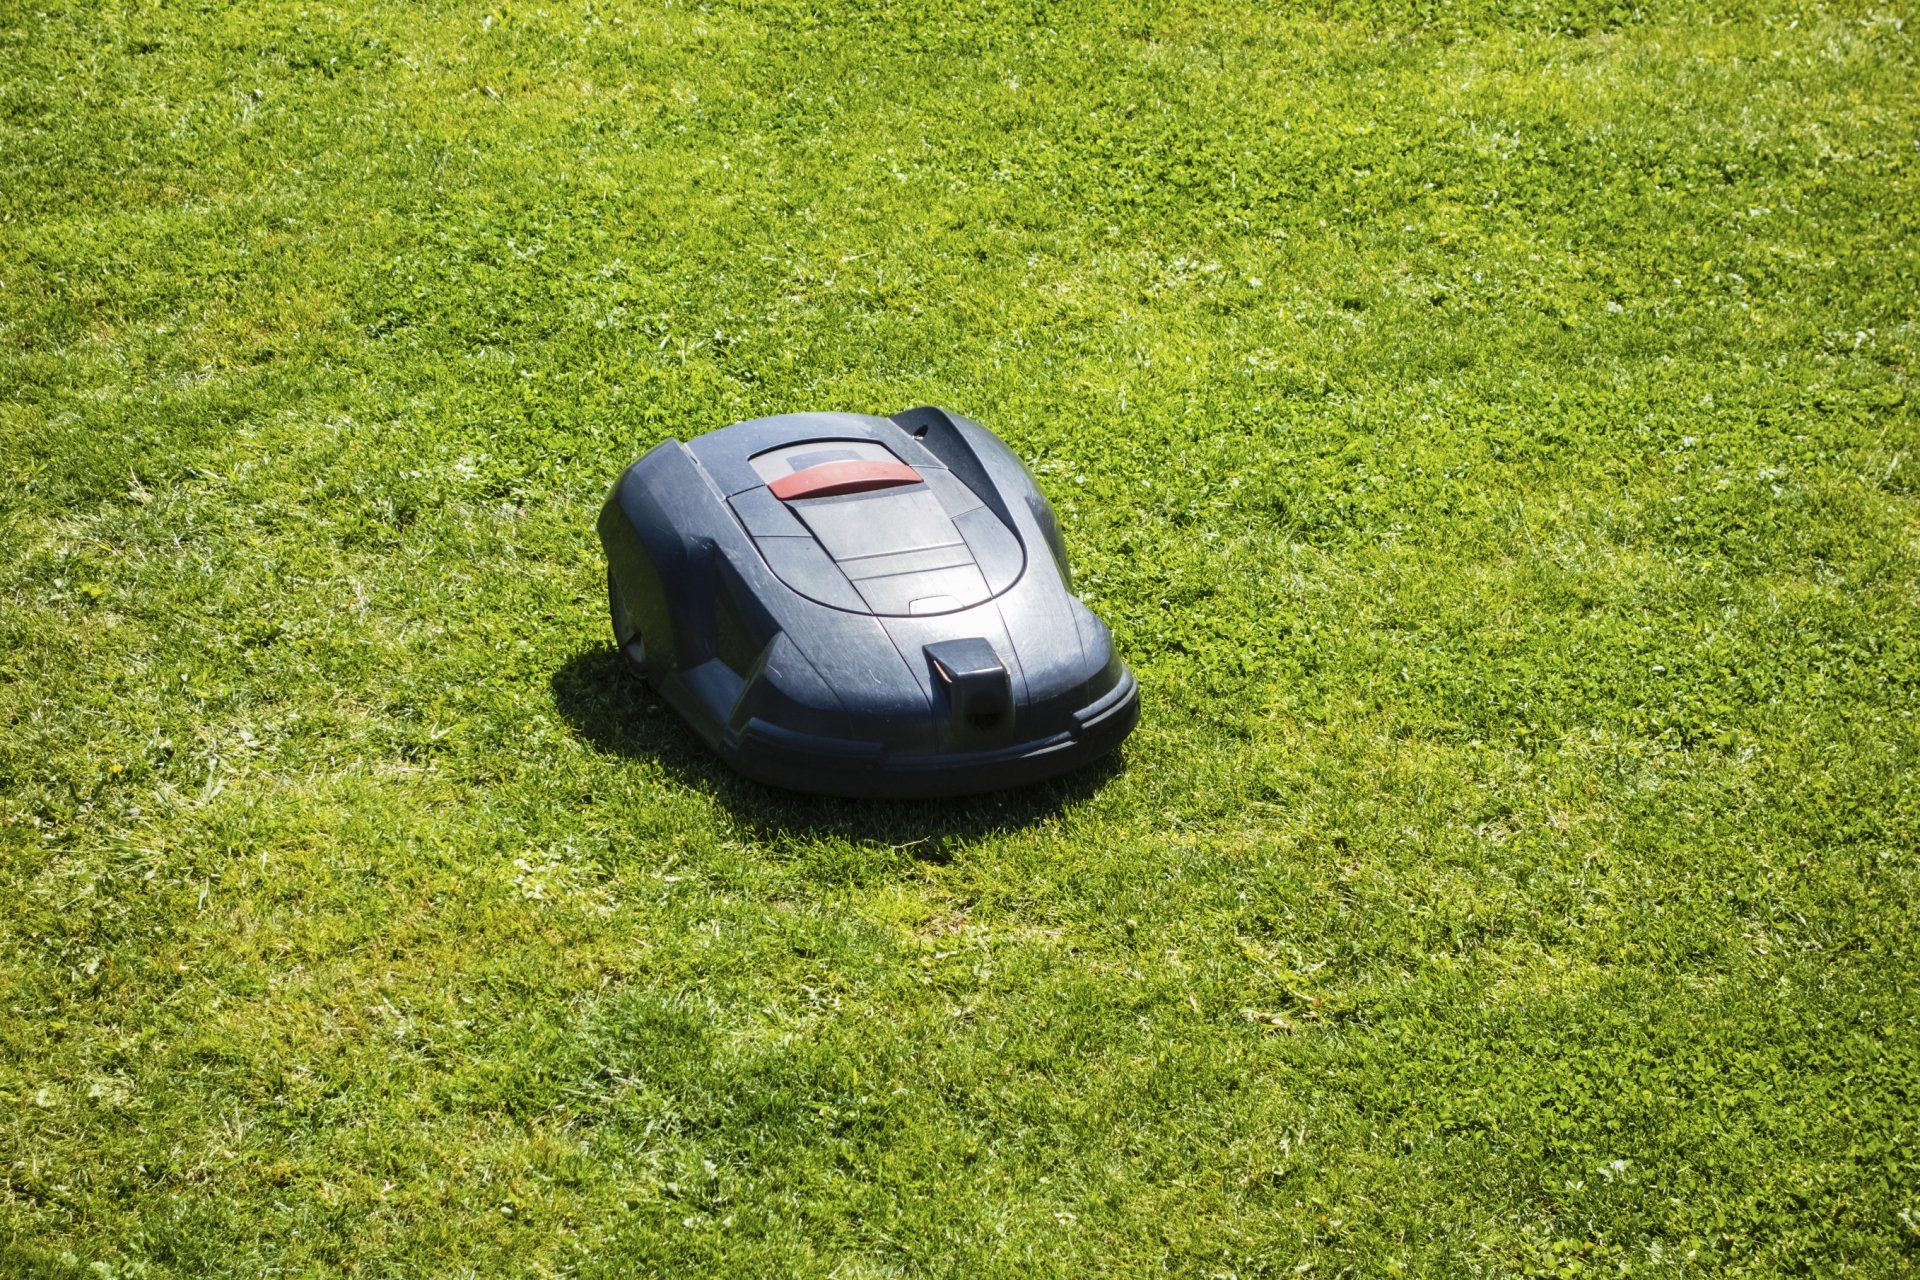 A robotic lawn mower is sitting on top of a lush green lawn.